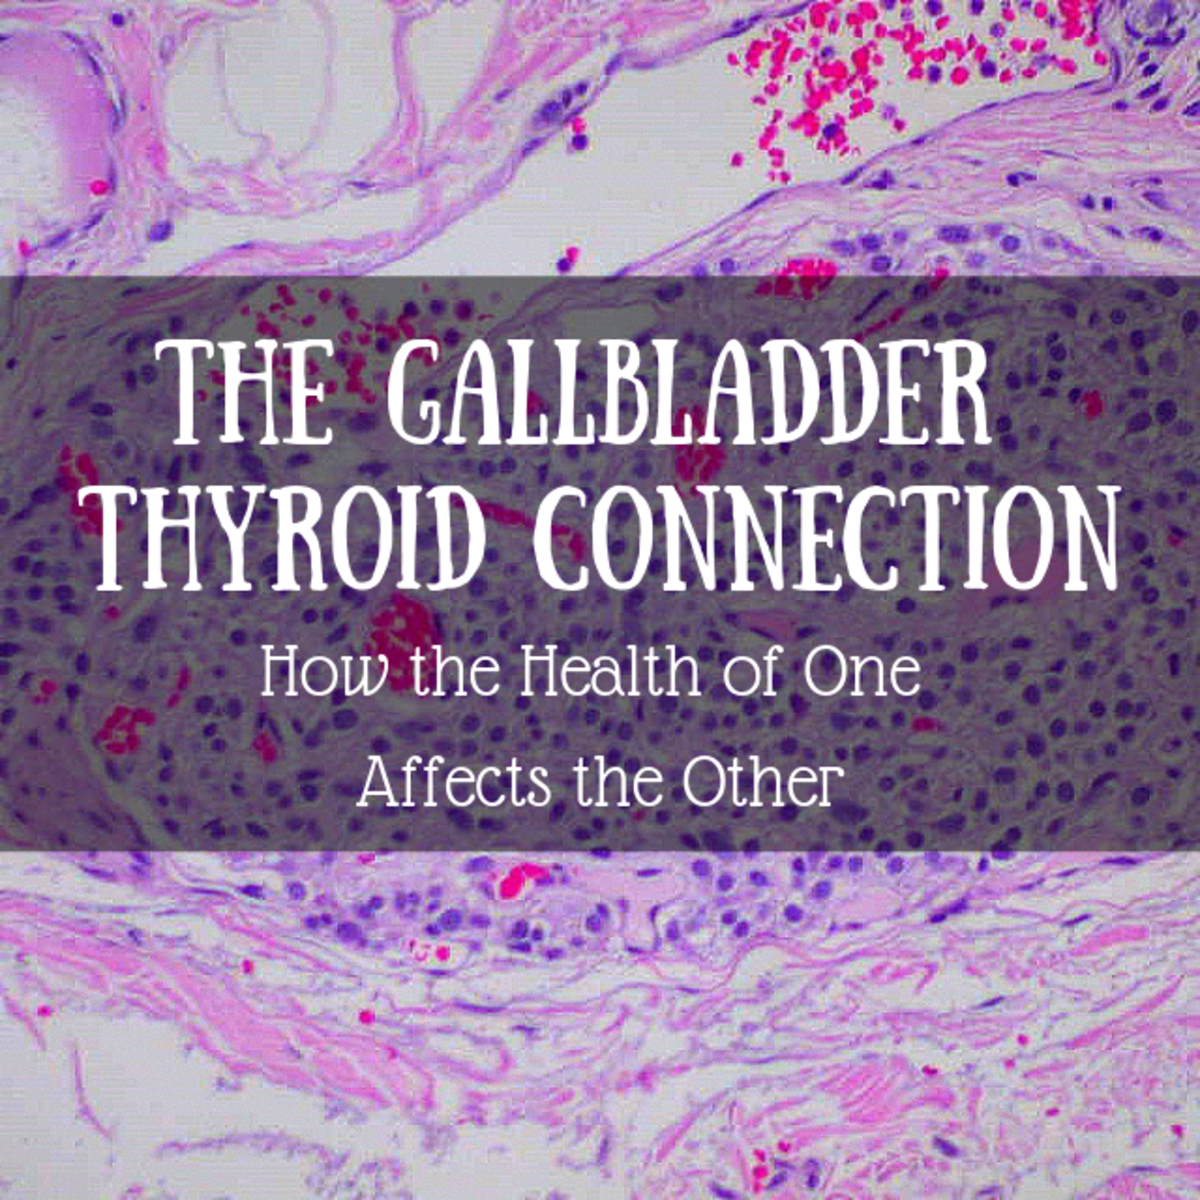 the-gallbladder-thyroid-connection-how-the-health-of-one-impacts-the-health-of-the-other